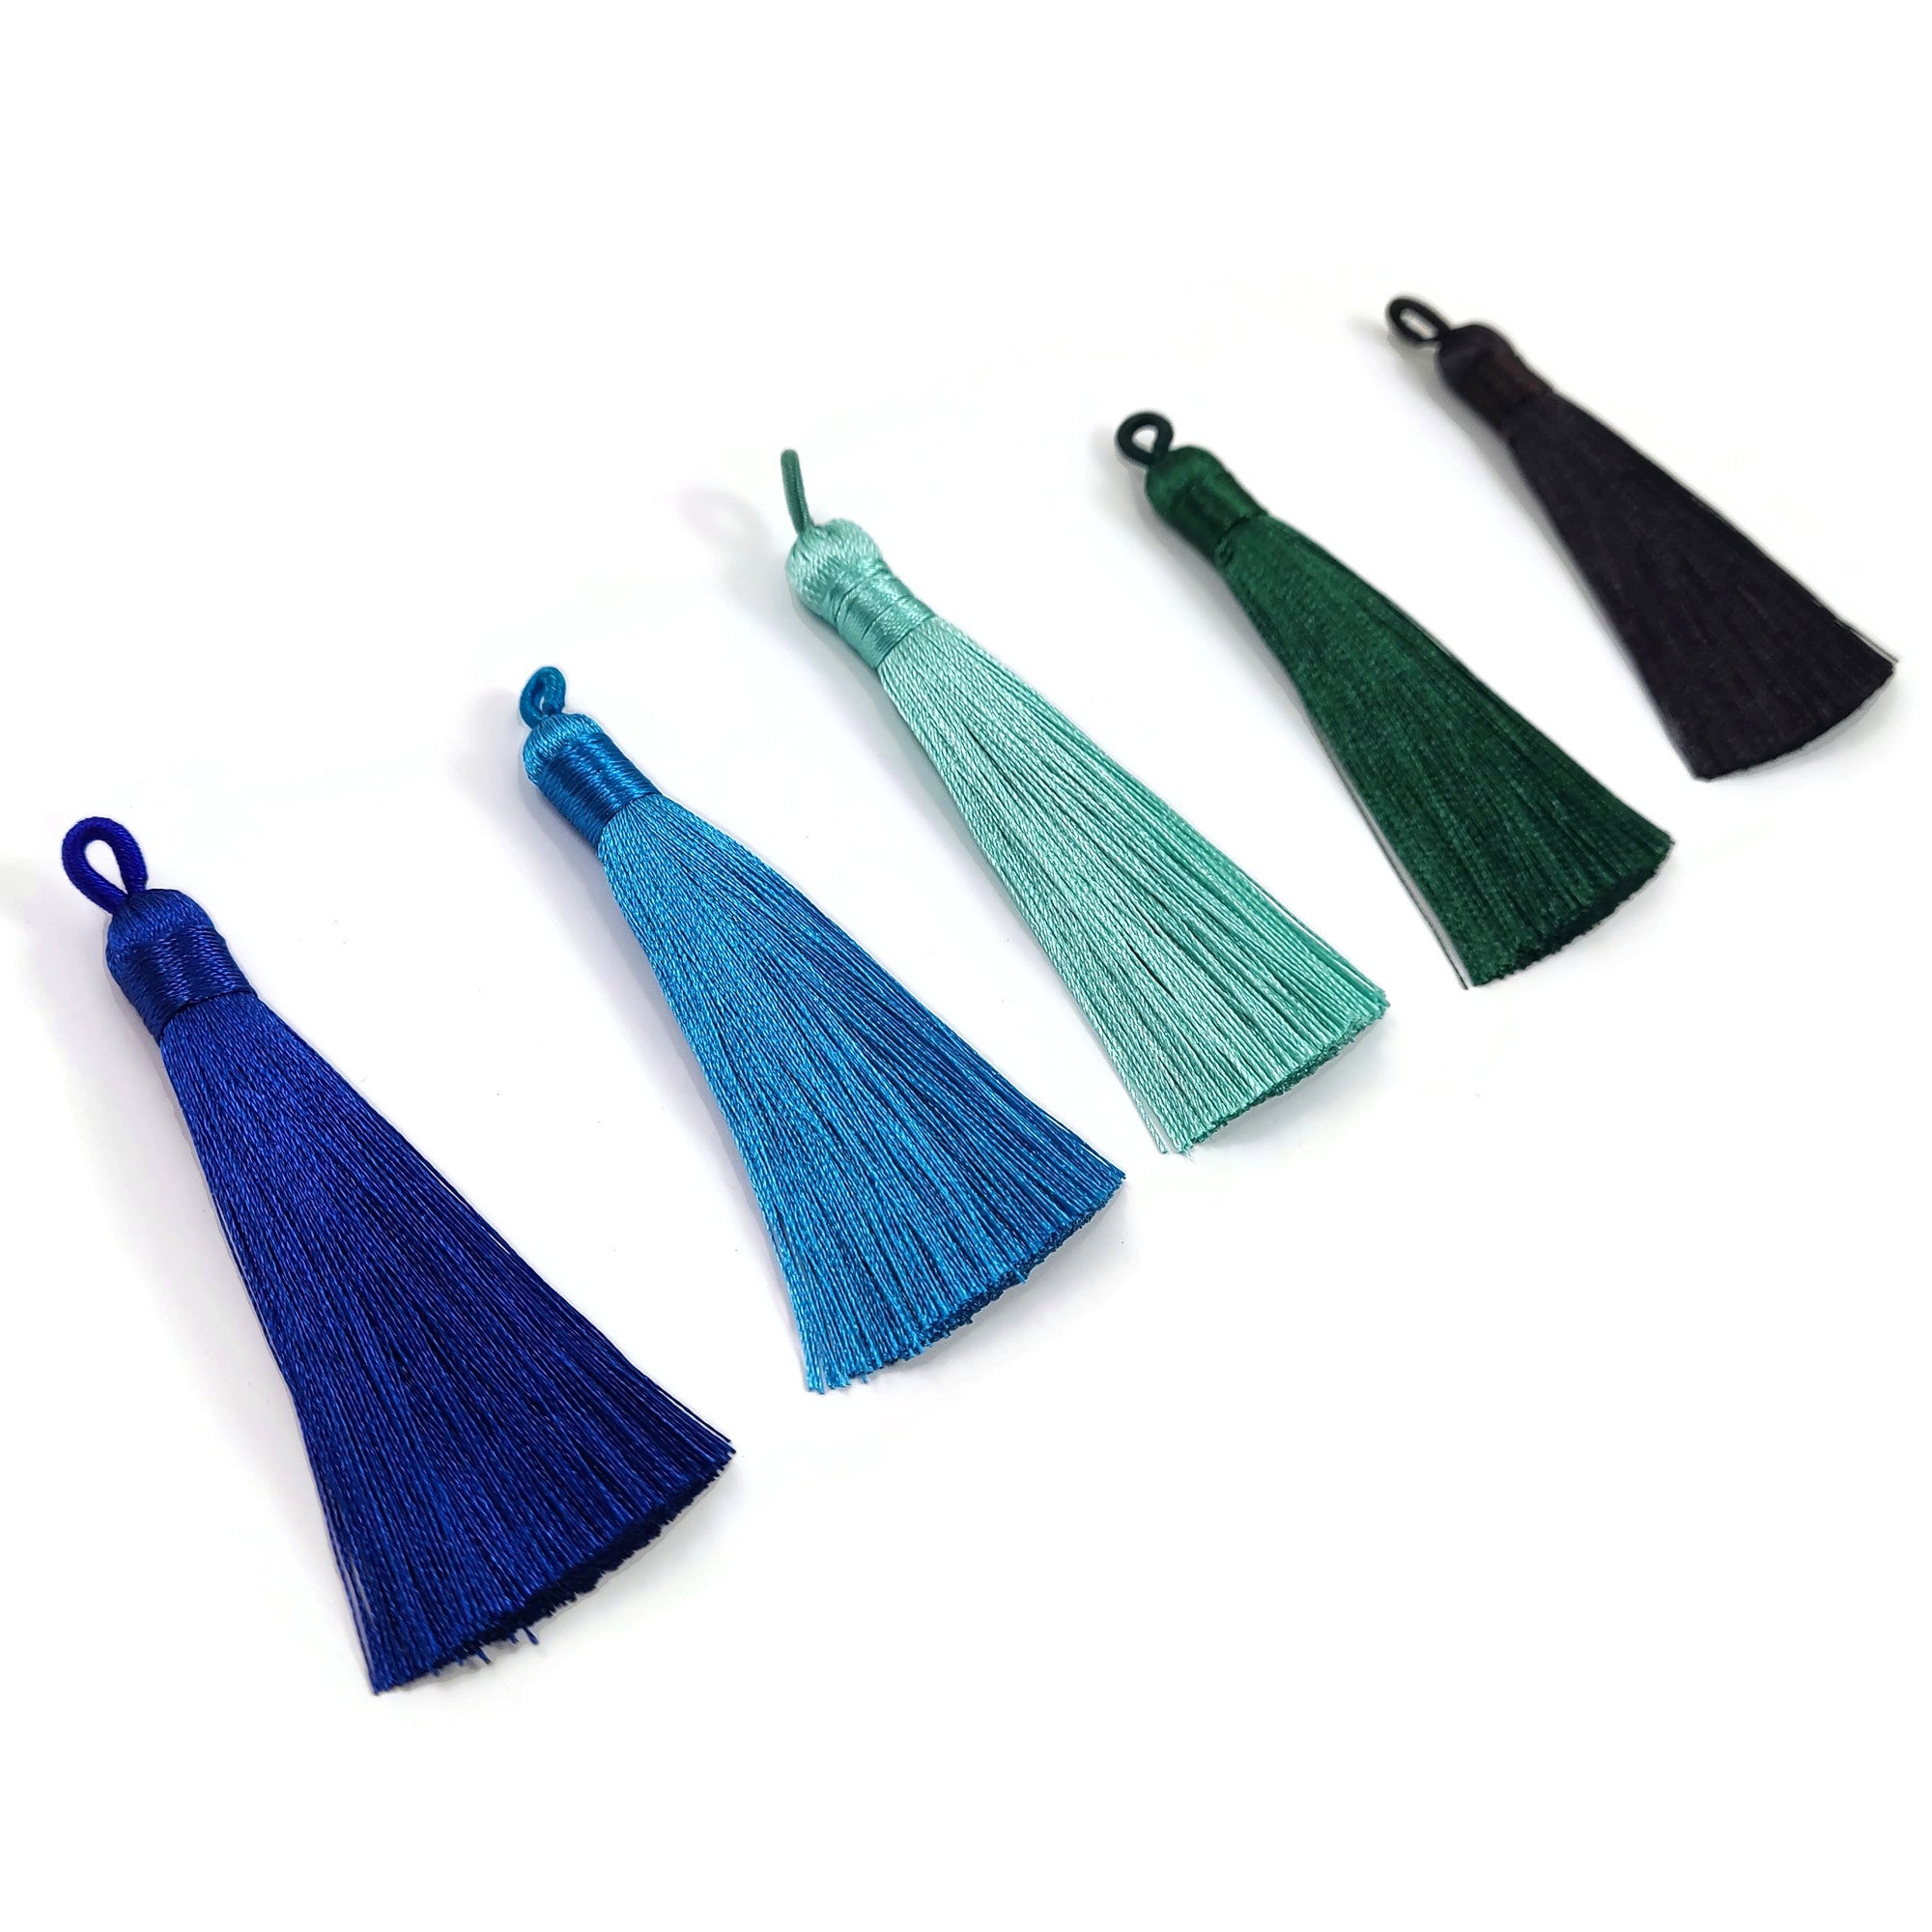 Silky tassel 80mm long, Choose your colors, High Quality, Bulk or by unit